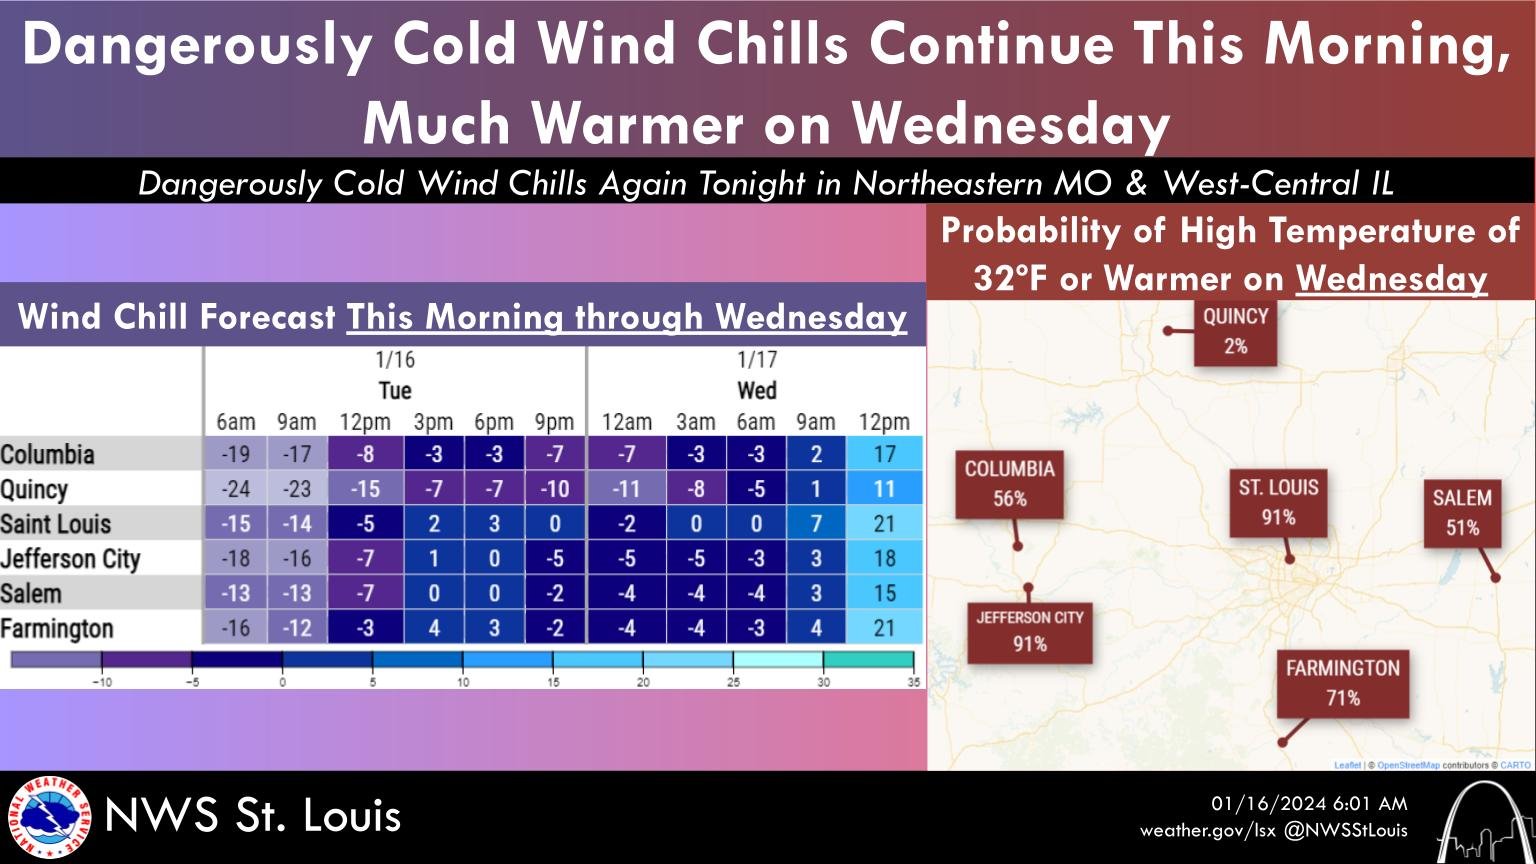 UPDATE: Wind chill warning for Columbia in effect until noon; warmer temperatures on Wednesday